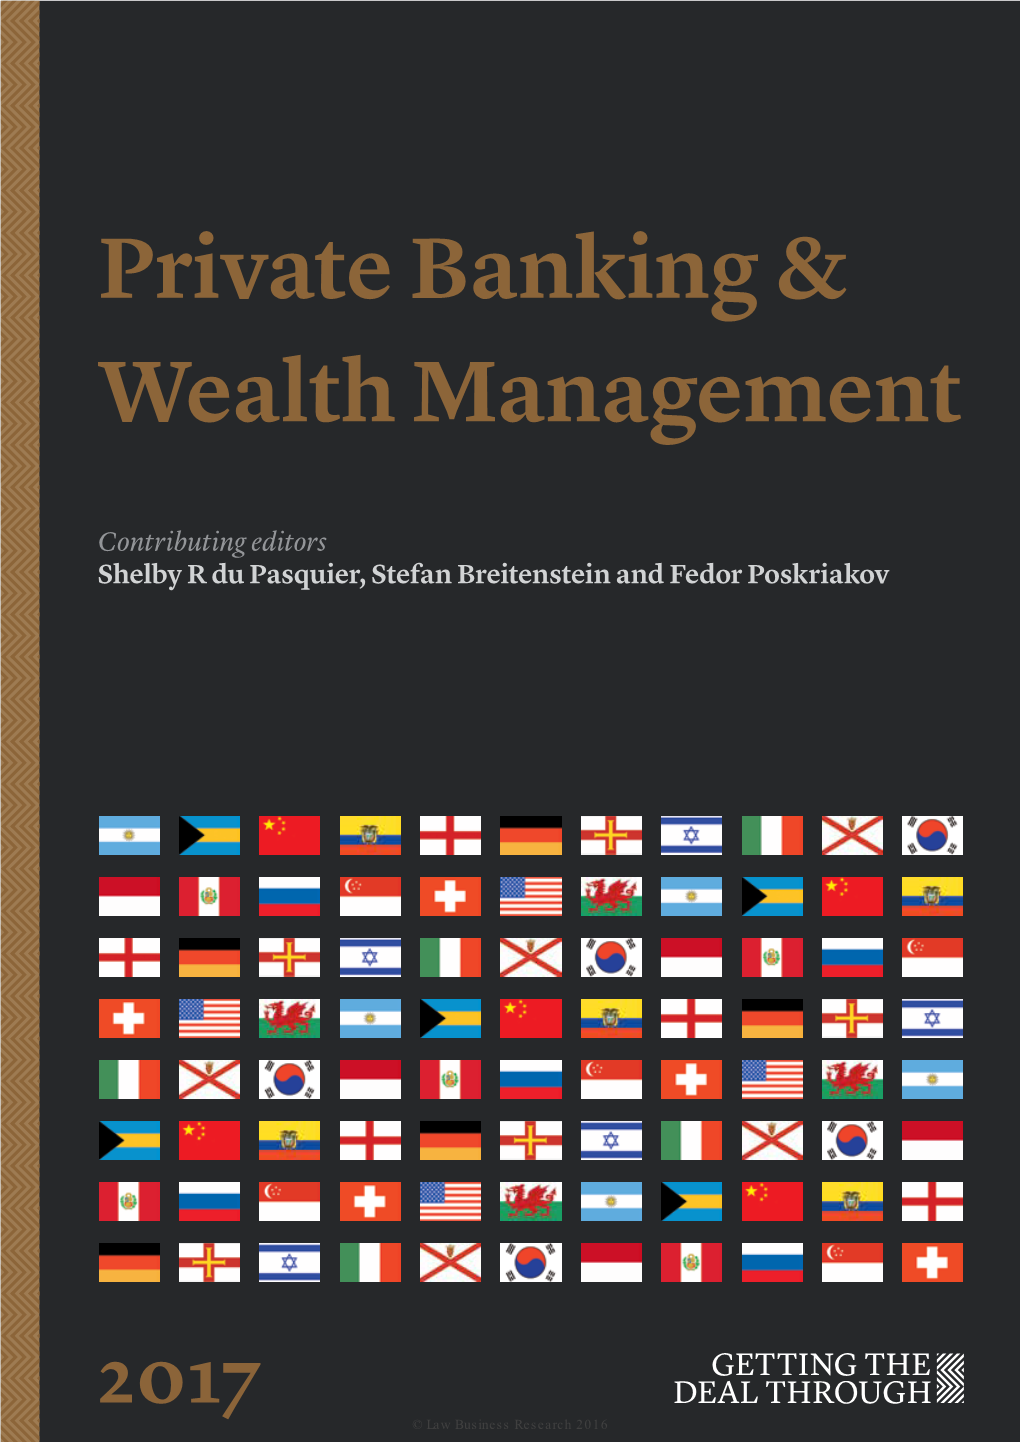 Private Banking & Wealth Management